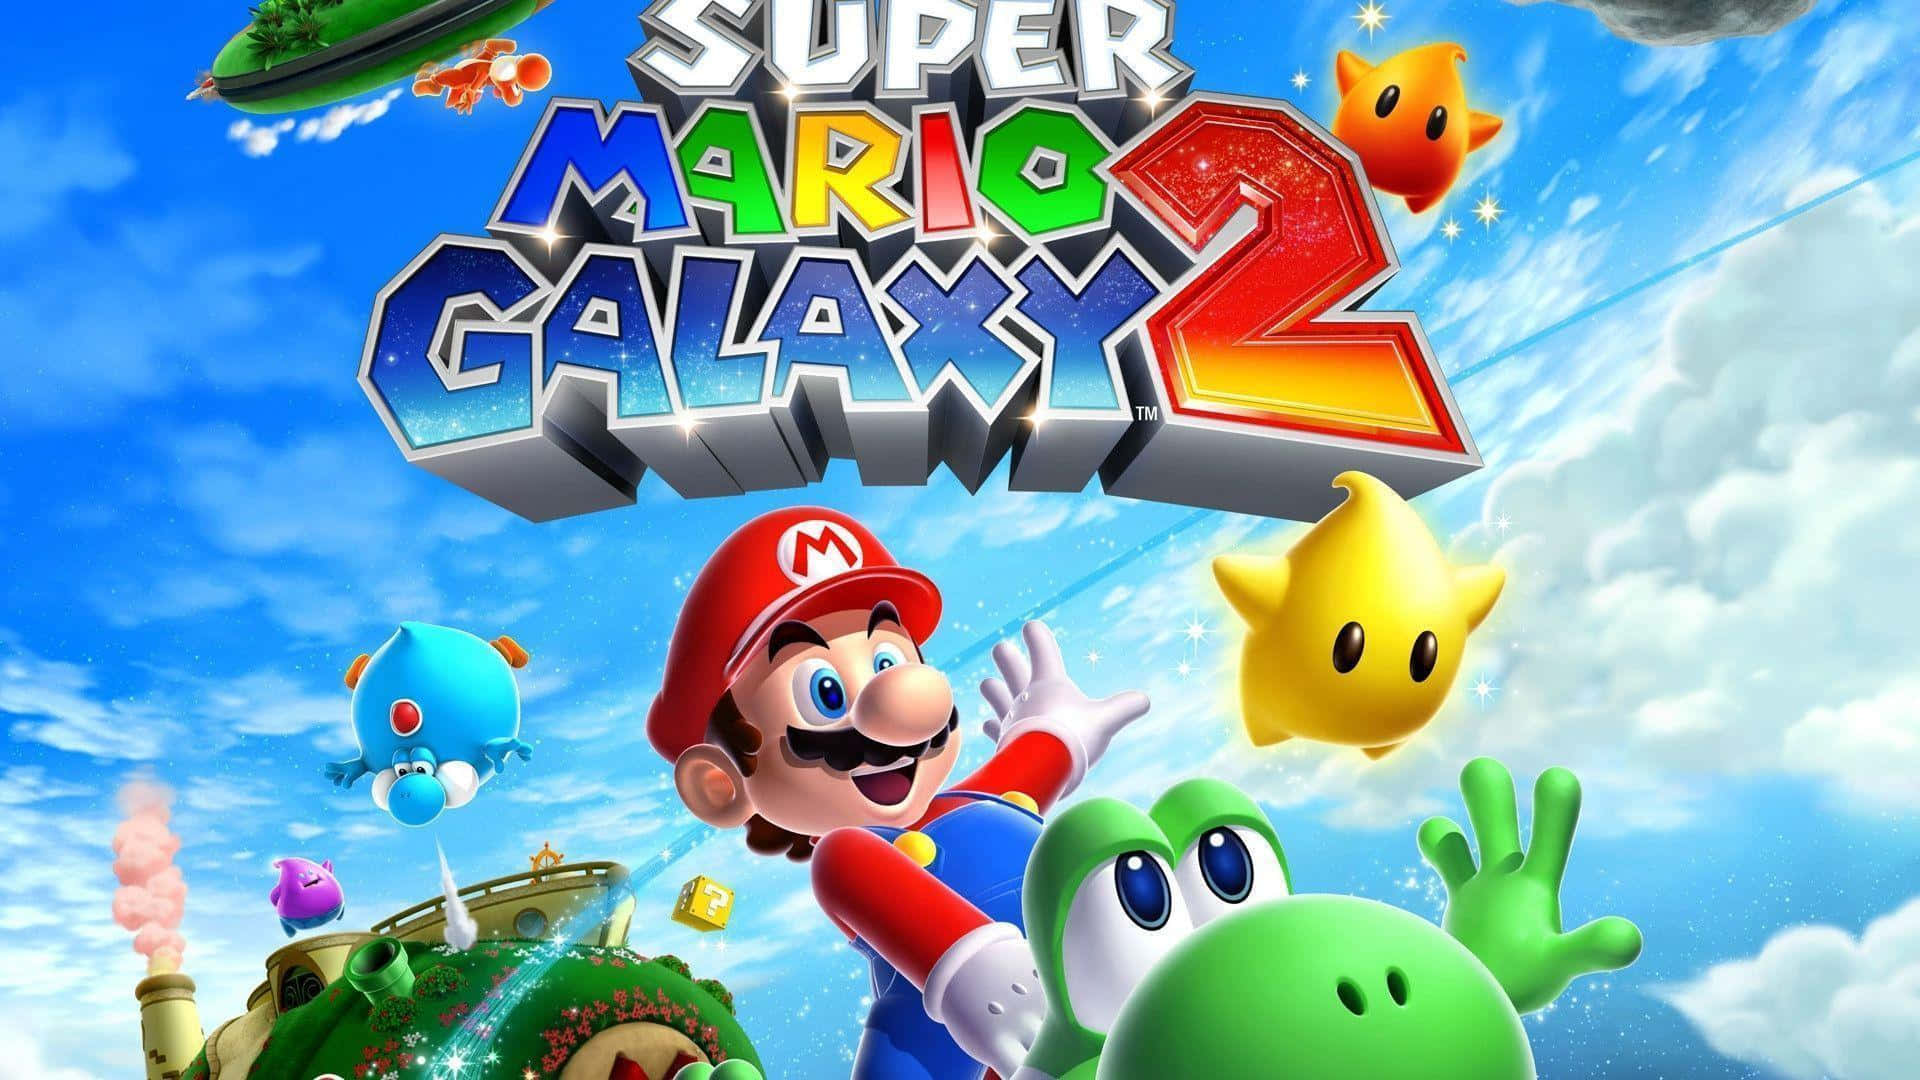 Travel the Milky Way in search of stars in Super Mario Galaxy Wallpaper